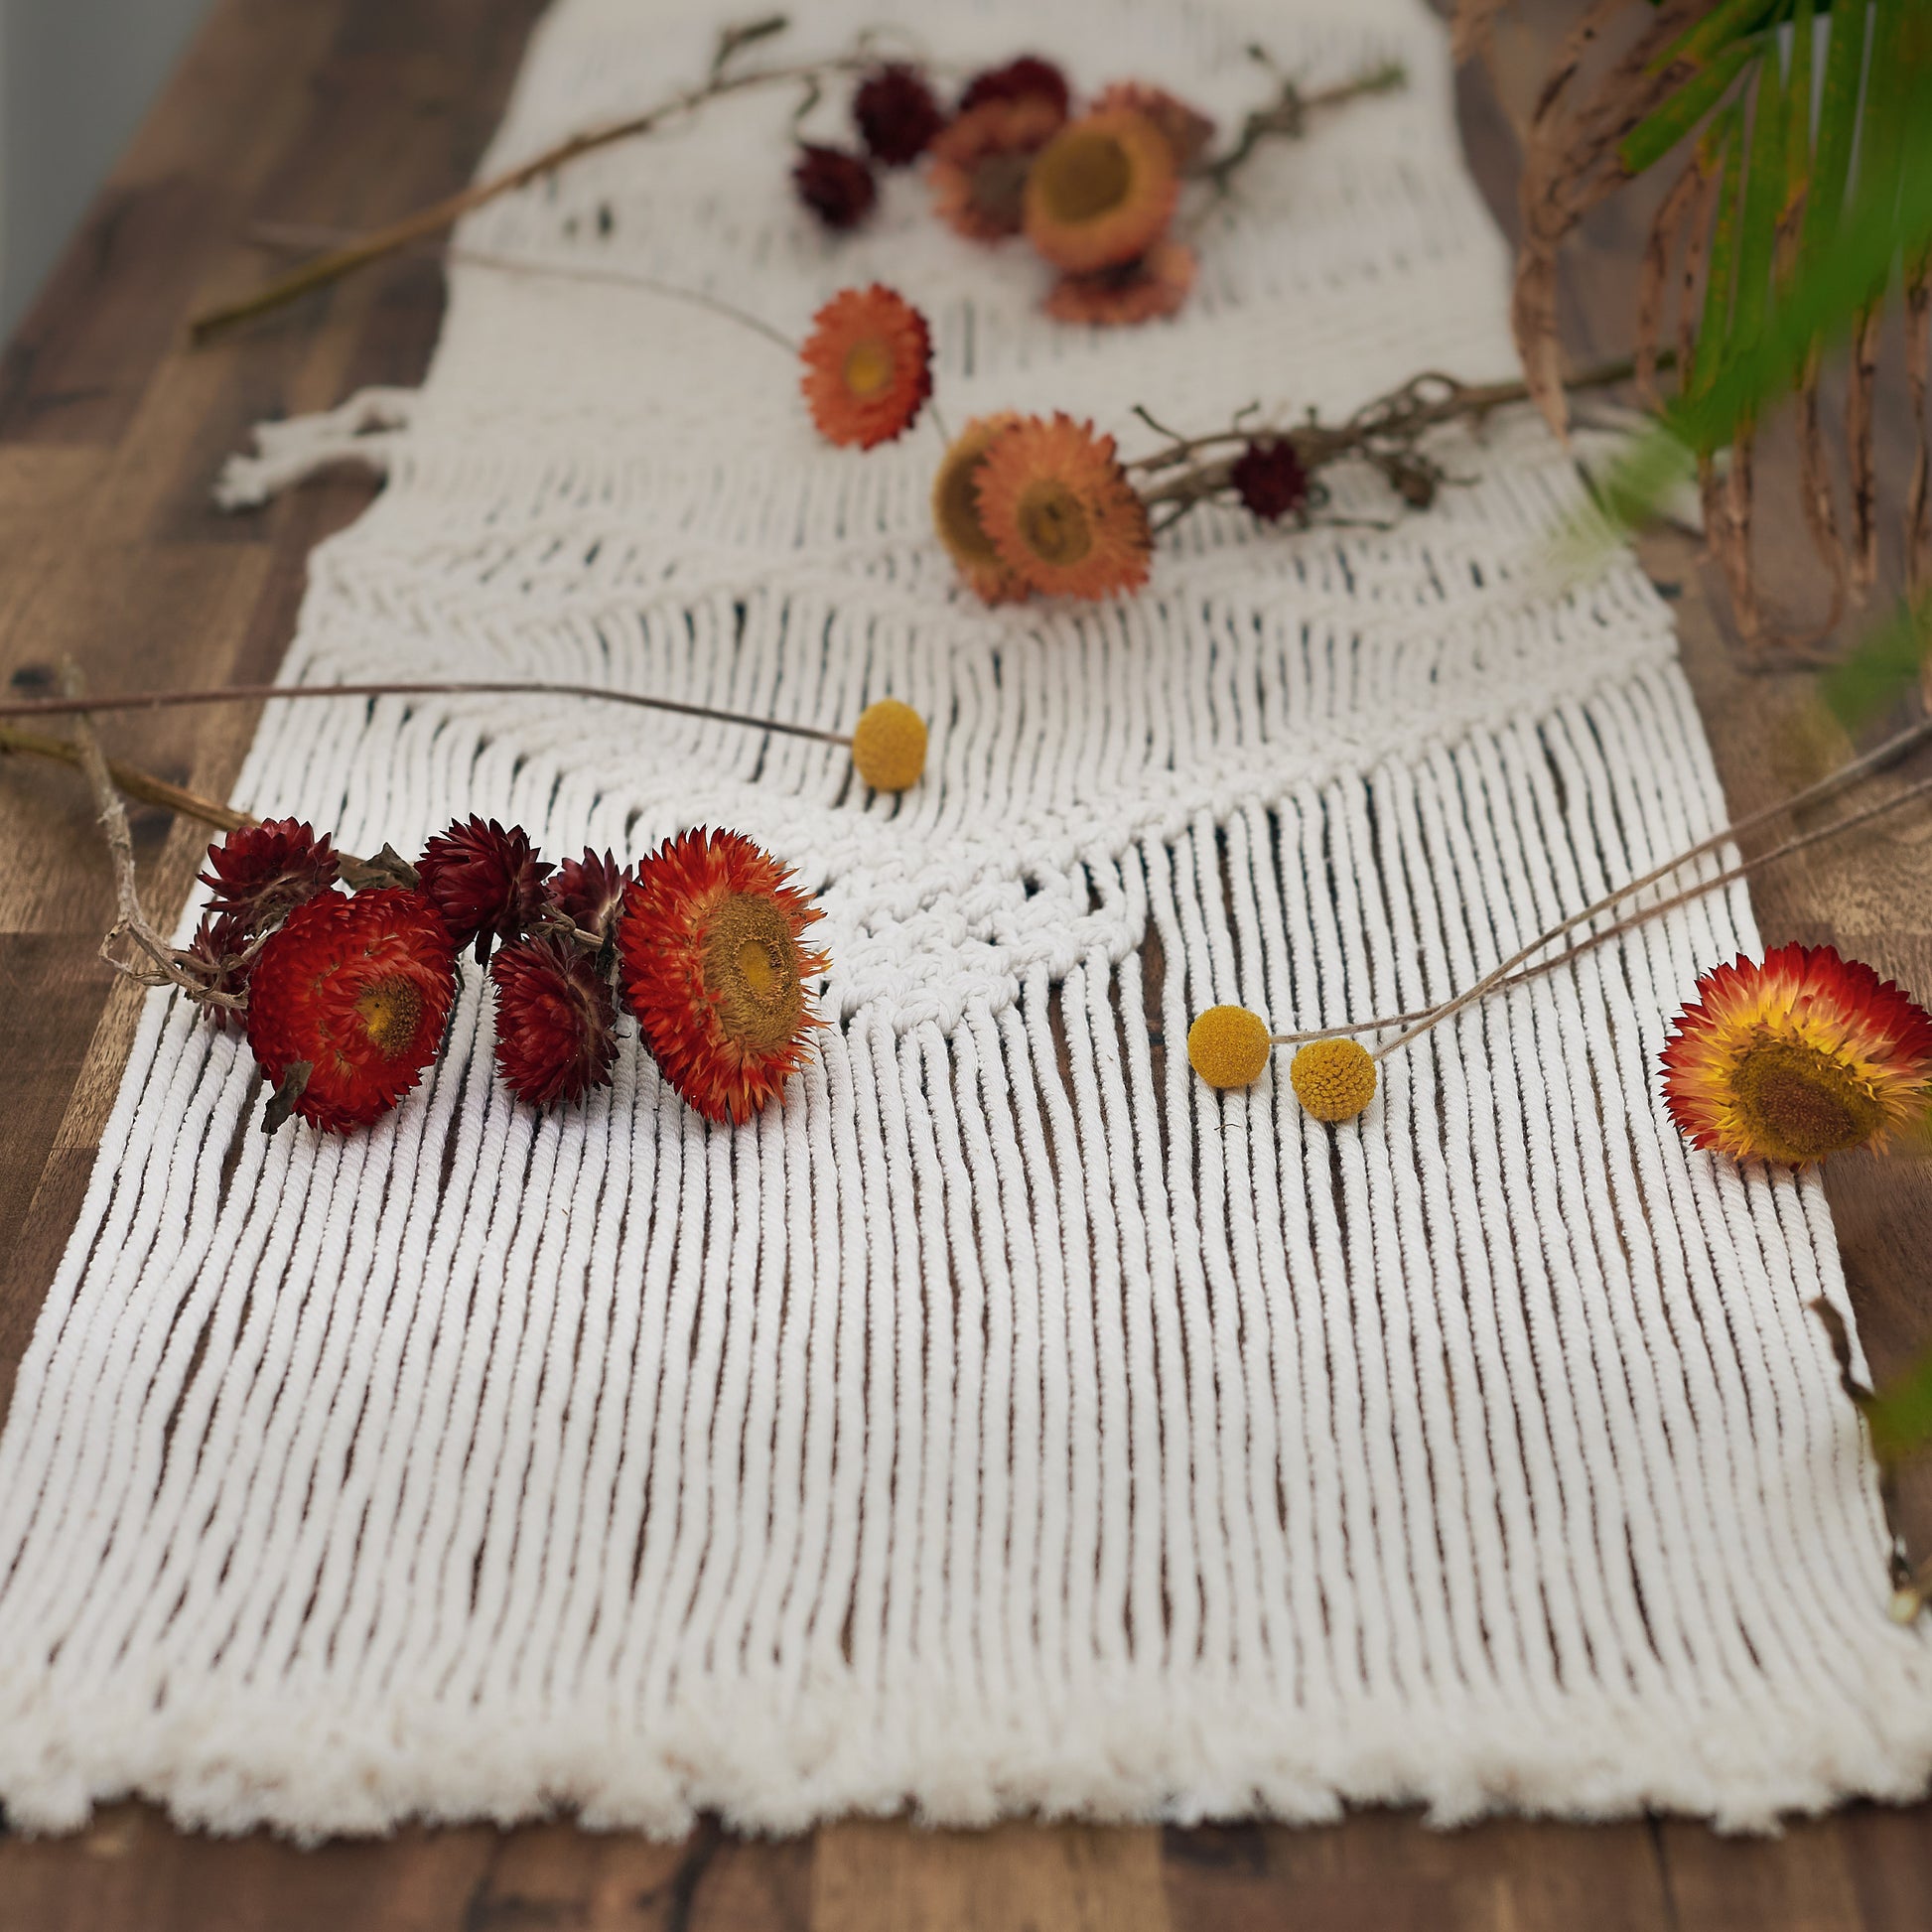 Natural white macrame table runner on a wooden table styled with rustic dried flowers